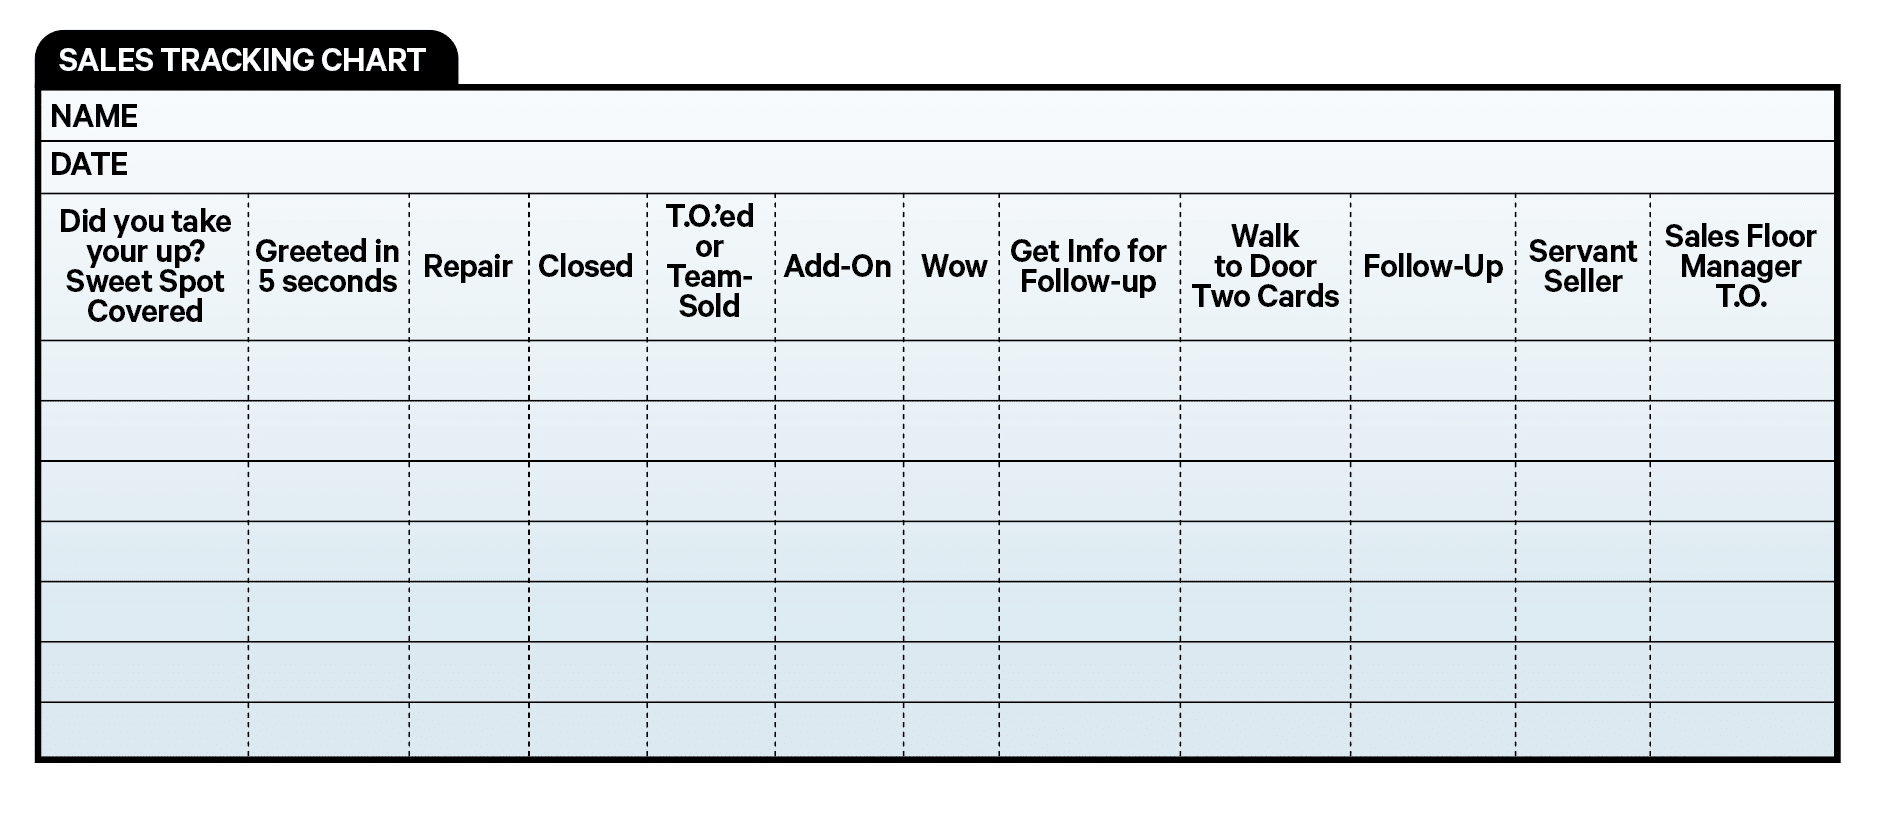 sales tracking chart